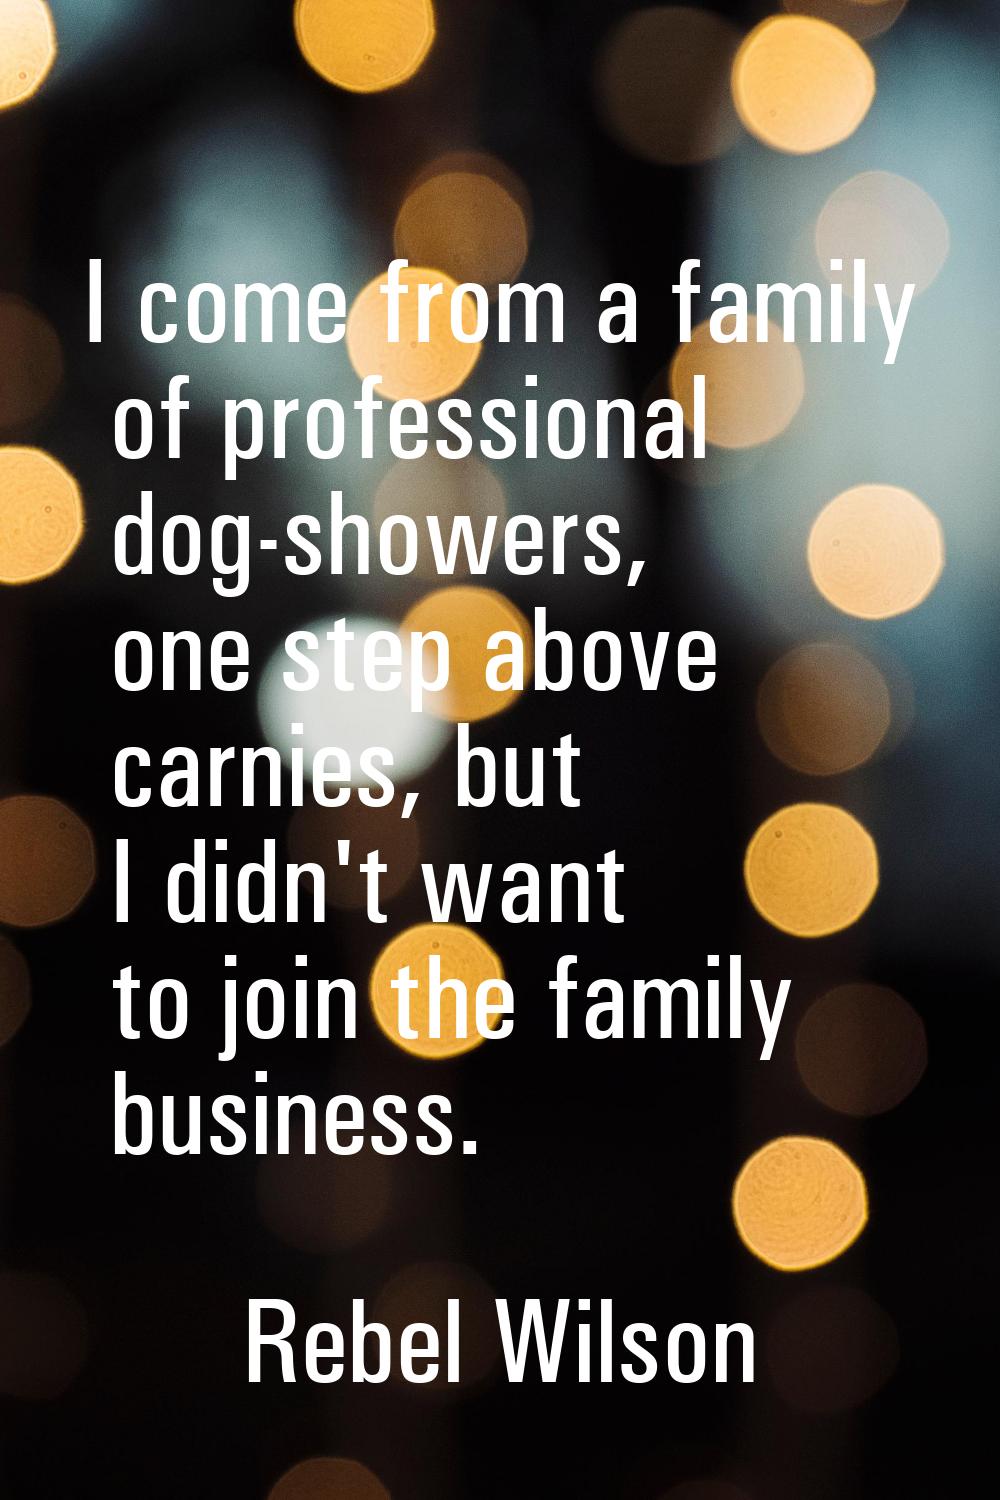 I come from a family of professional dog-showers, one step above carnies, but I didn't want to join